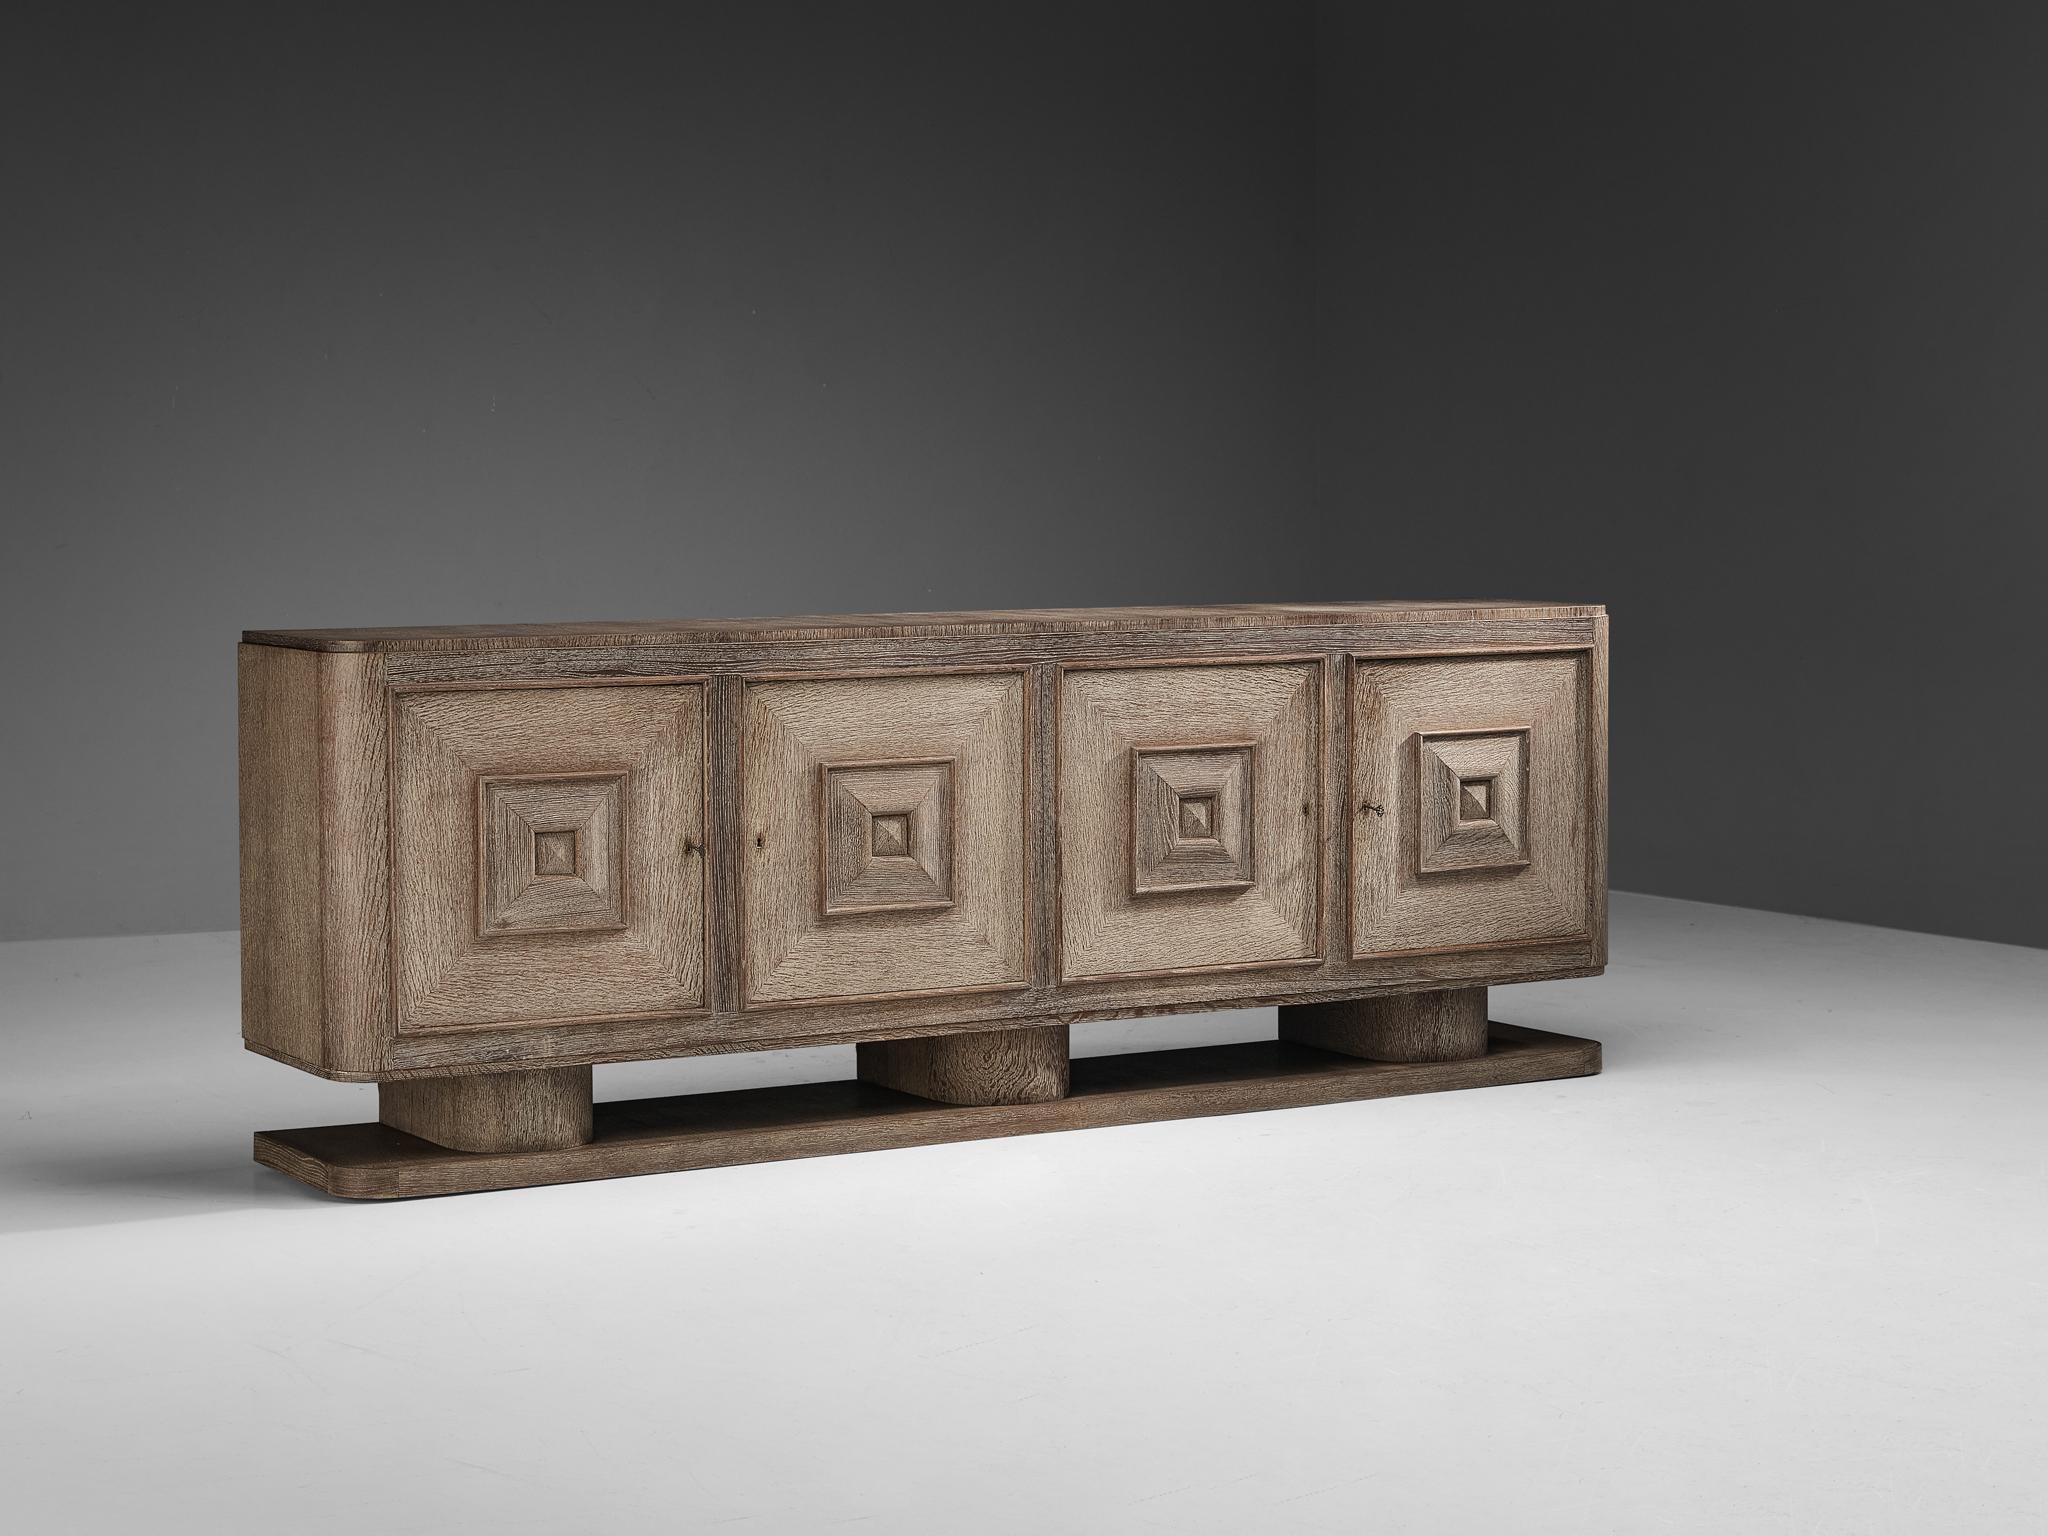 Sideboard, cerused oak, France, 1940s.

Stunning and monumental large sideboard in a light colored cerused oak. The partition of light and dark oak due to the technique used has a intriguing effect. This design is typical for the Art Deco period